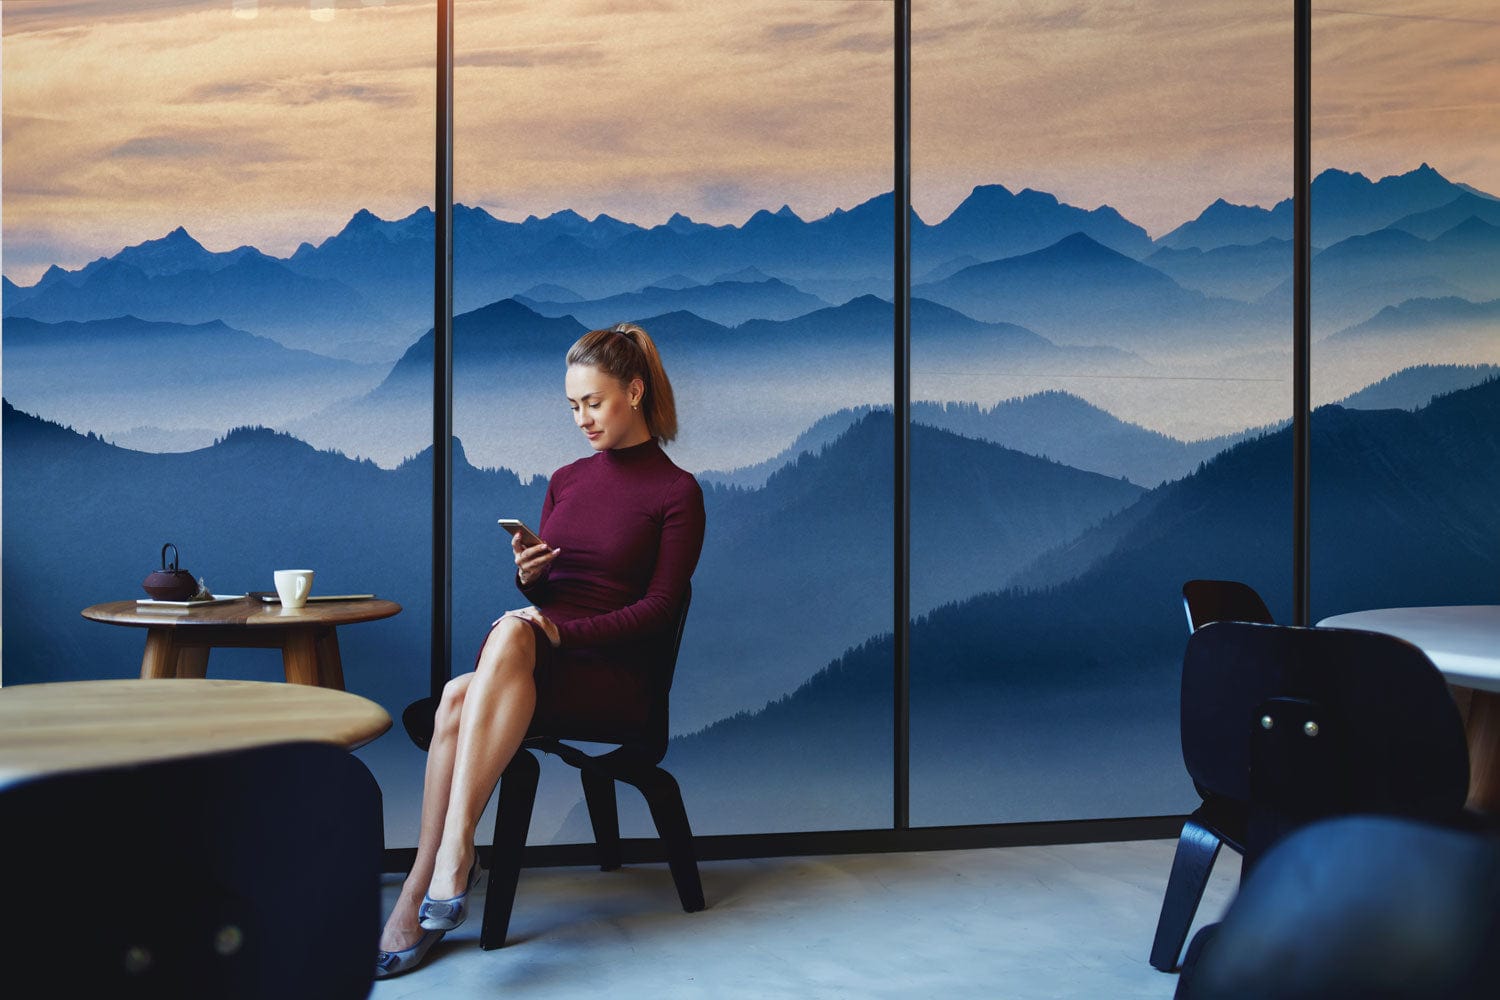 Wallpaper Mural with Undulating Peaks Landscapes for Use in Decorating the Dining Room